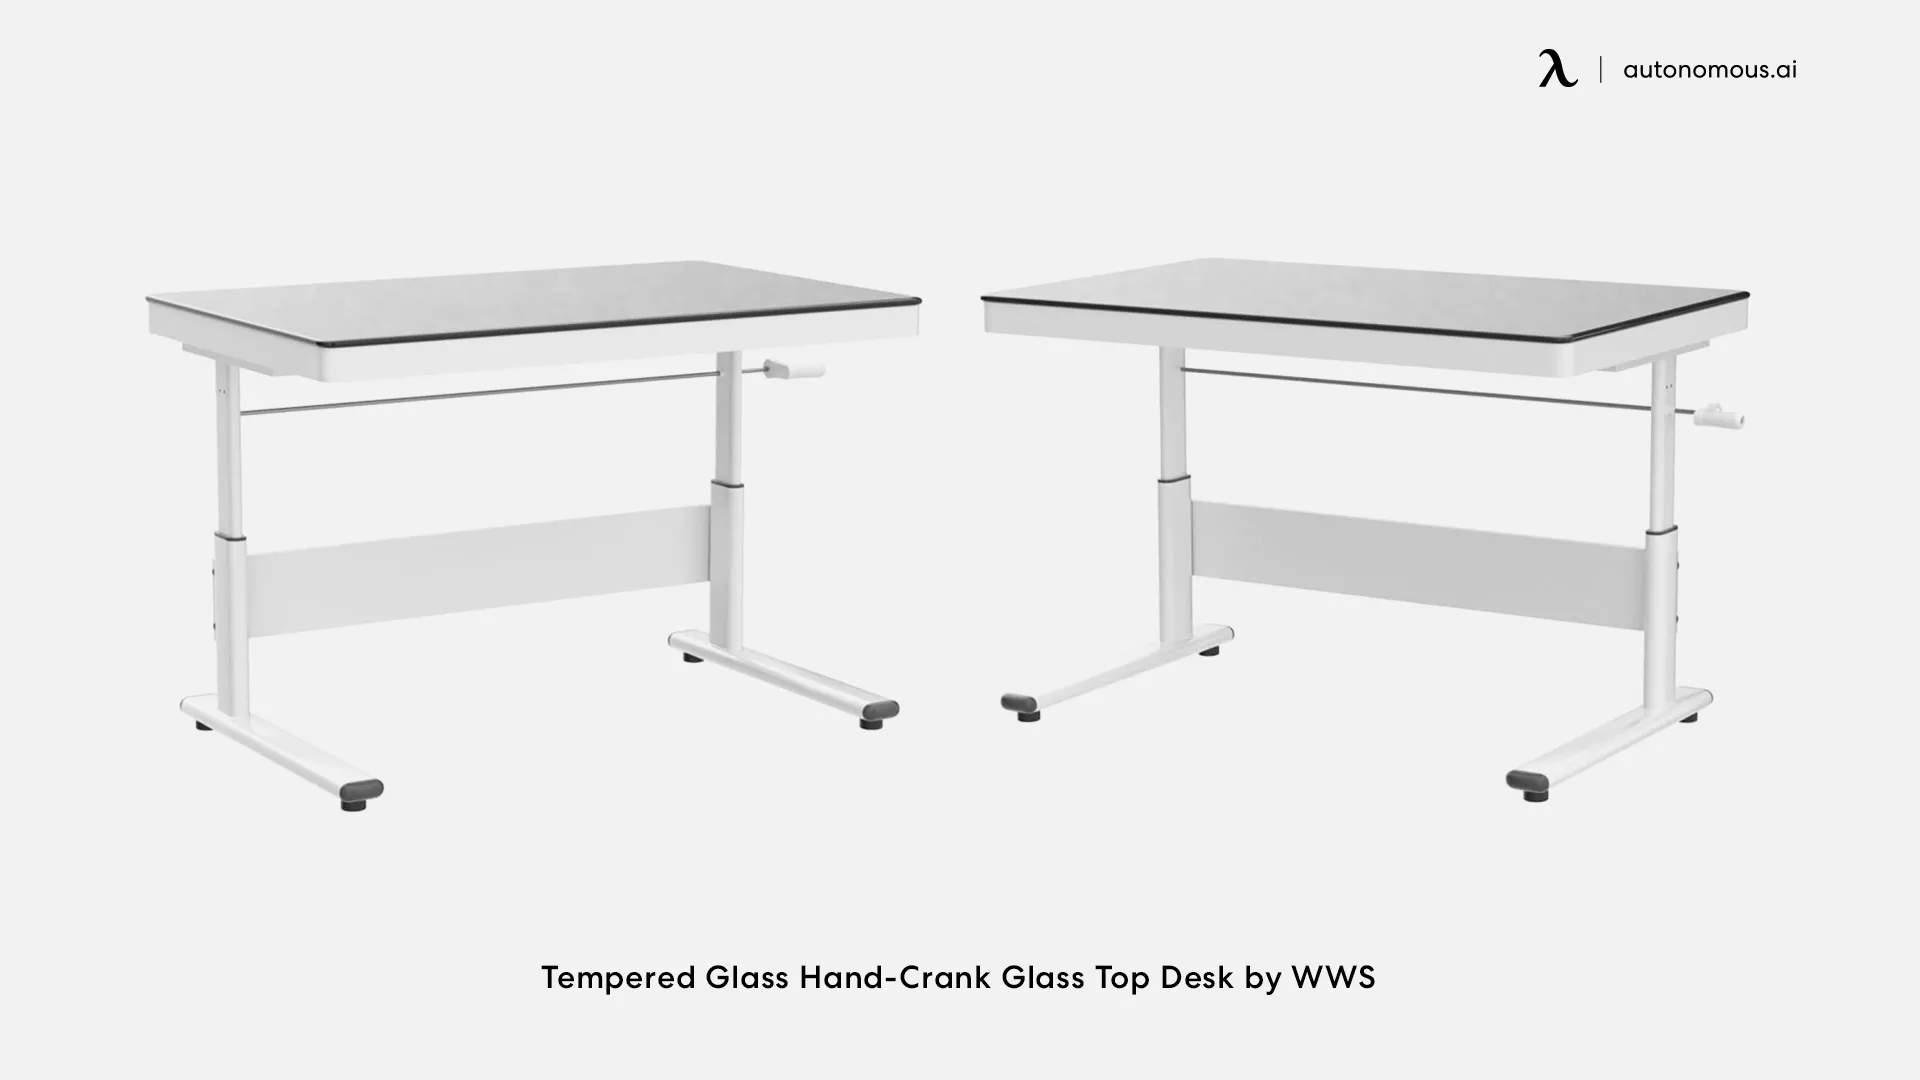 Tempered Glass Hand-Crank Glass Top Desk by WWS